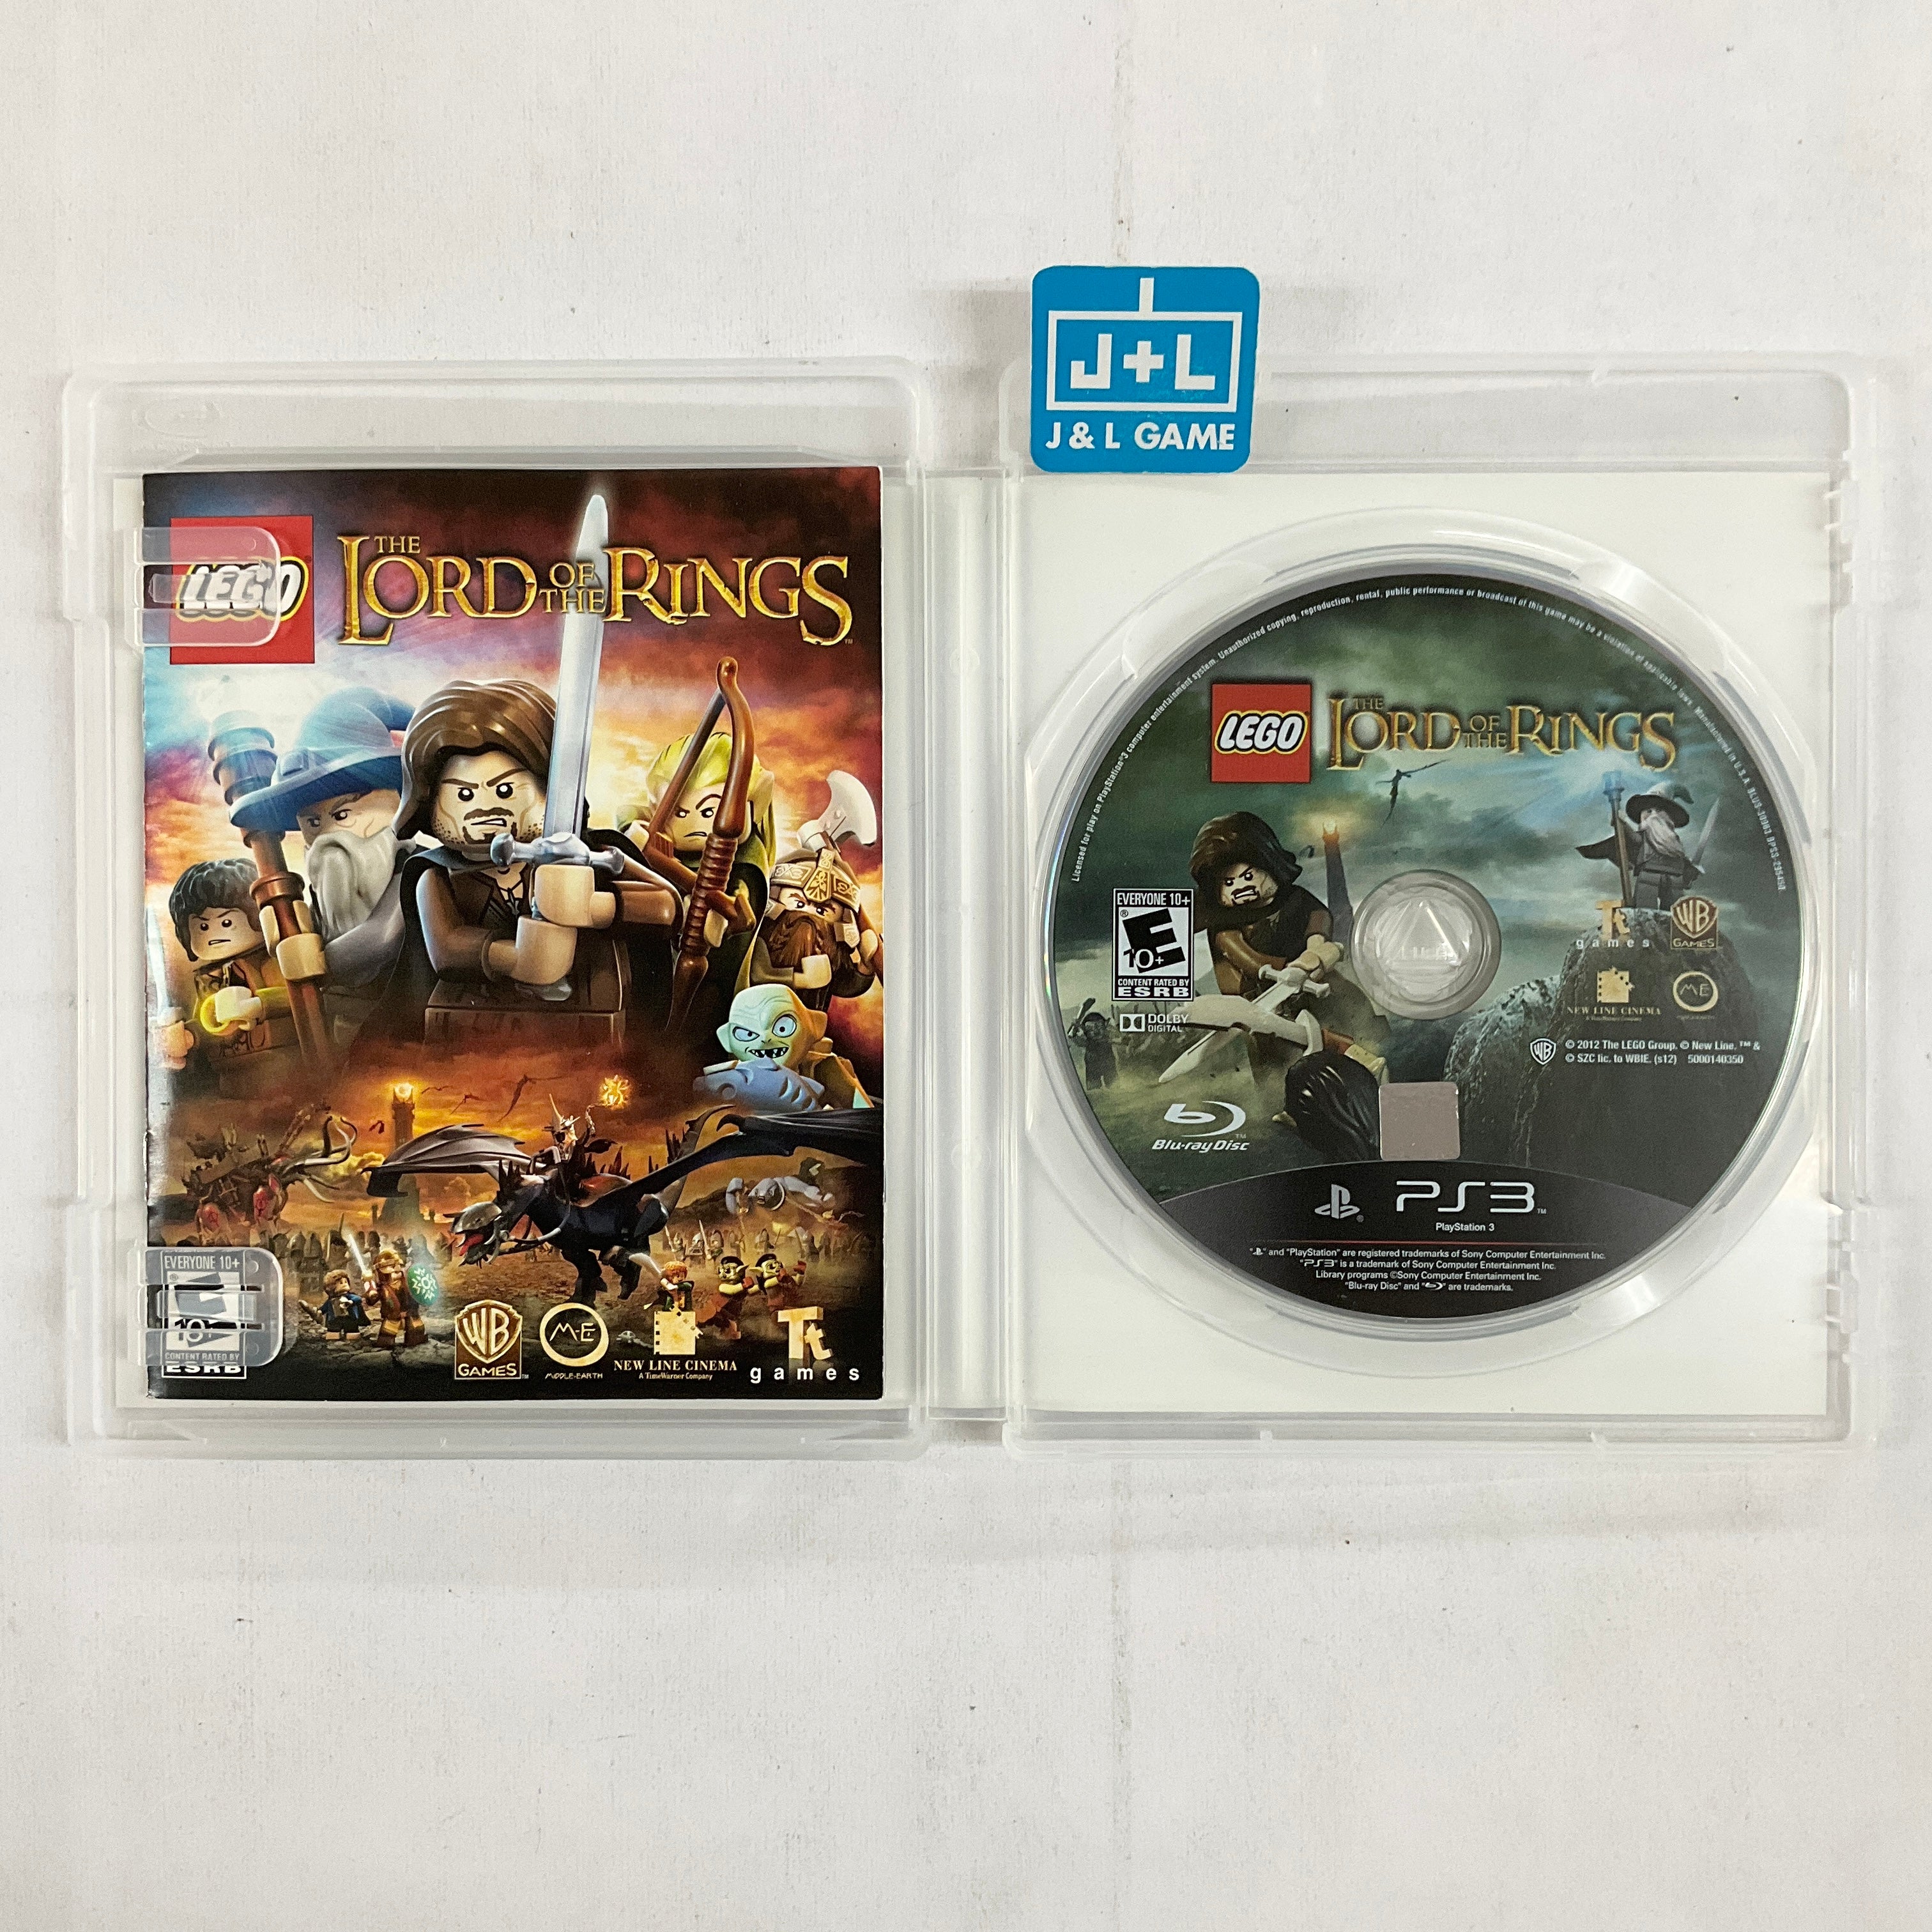 LEGO The Lord of the Rings - (PS3) PlayStation 3 [Pre-Owned] Video Games Warner Bros. Interactive Entertainment   